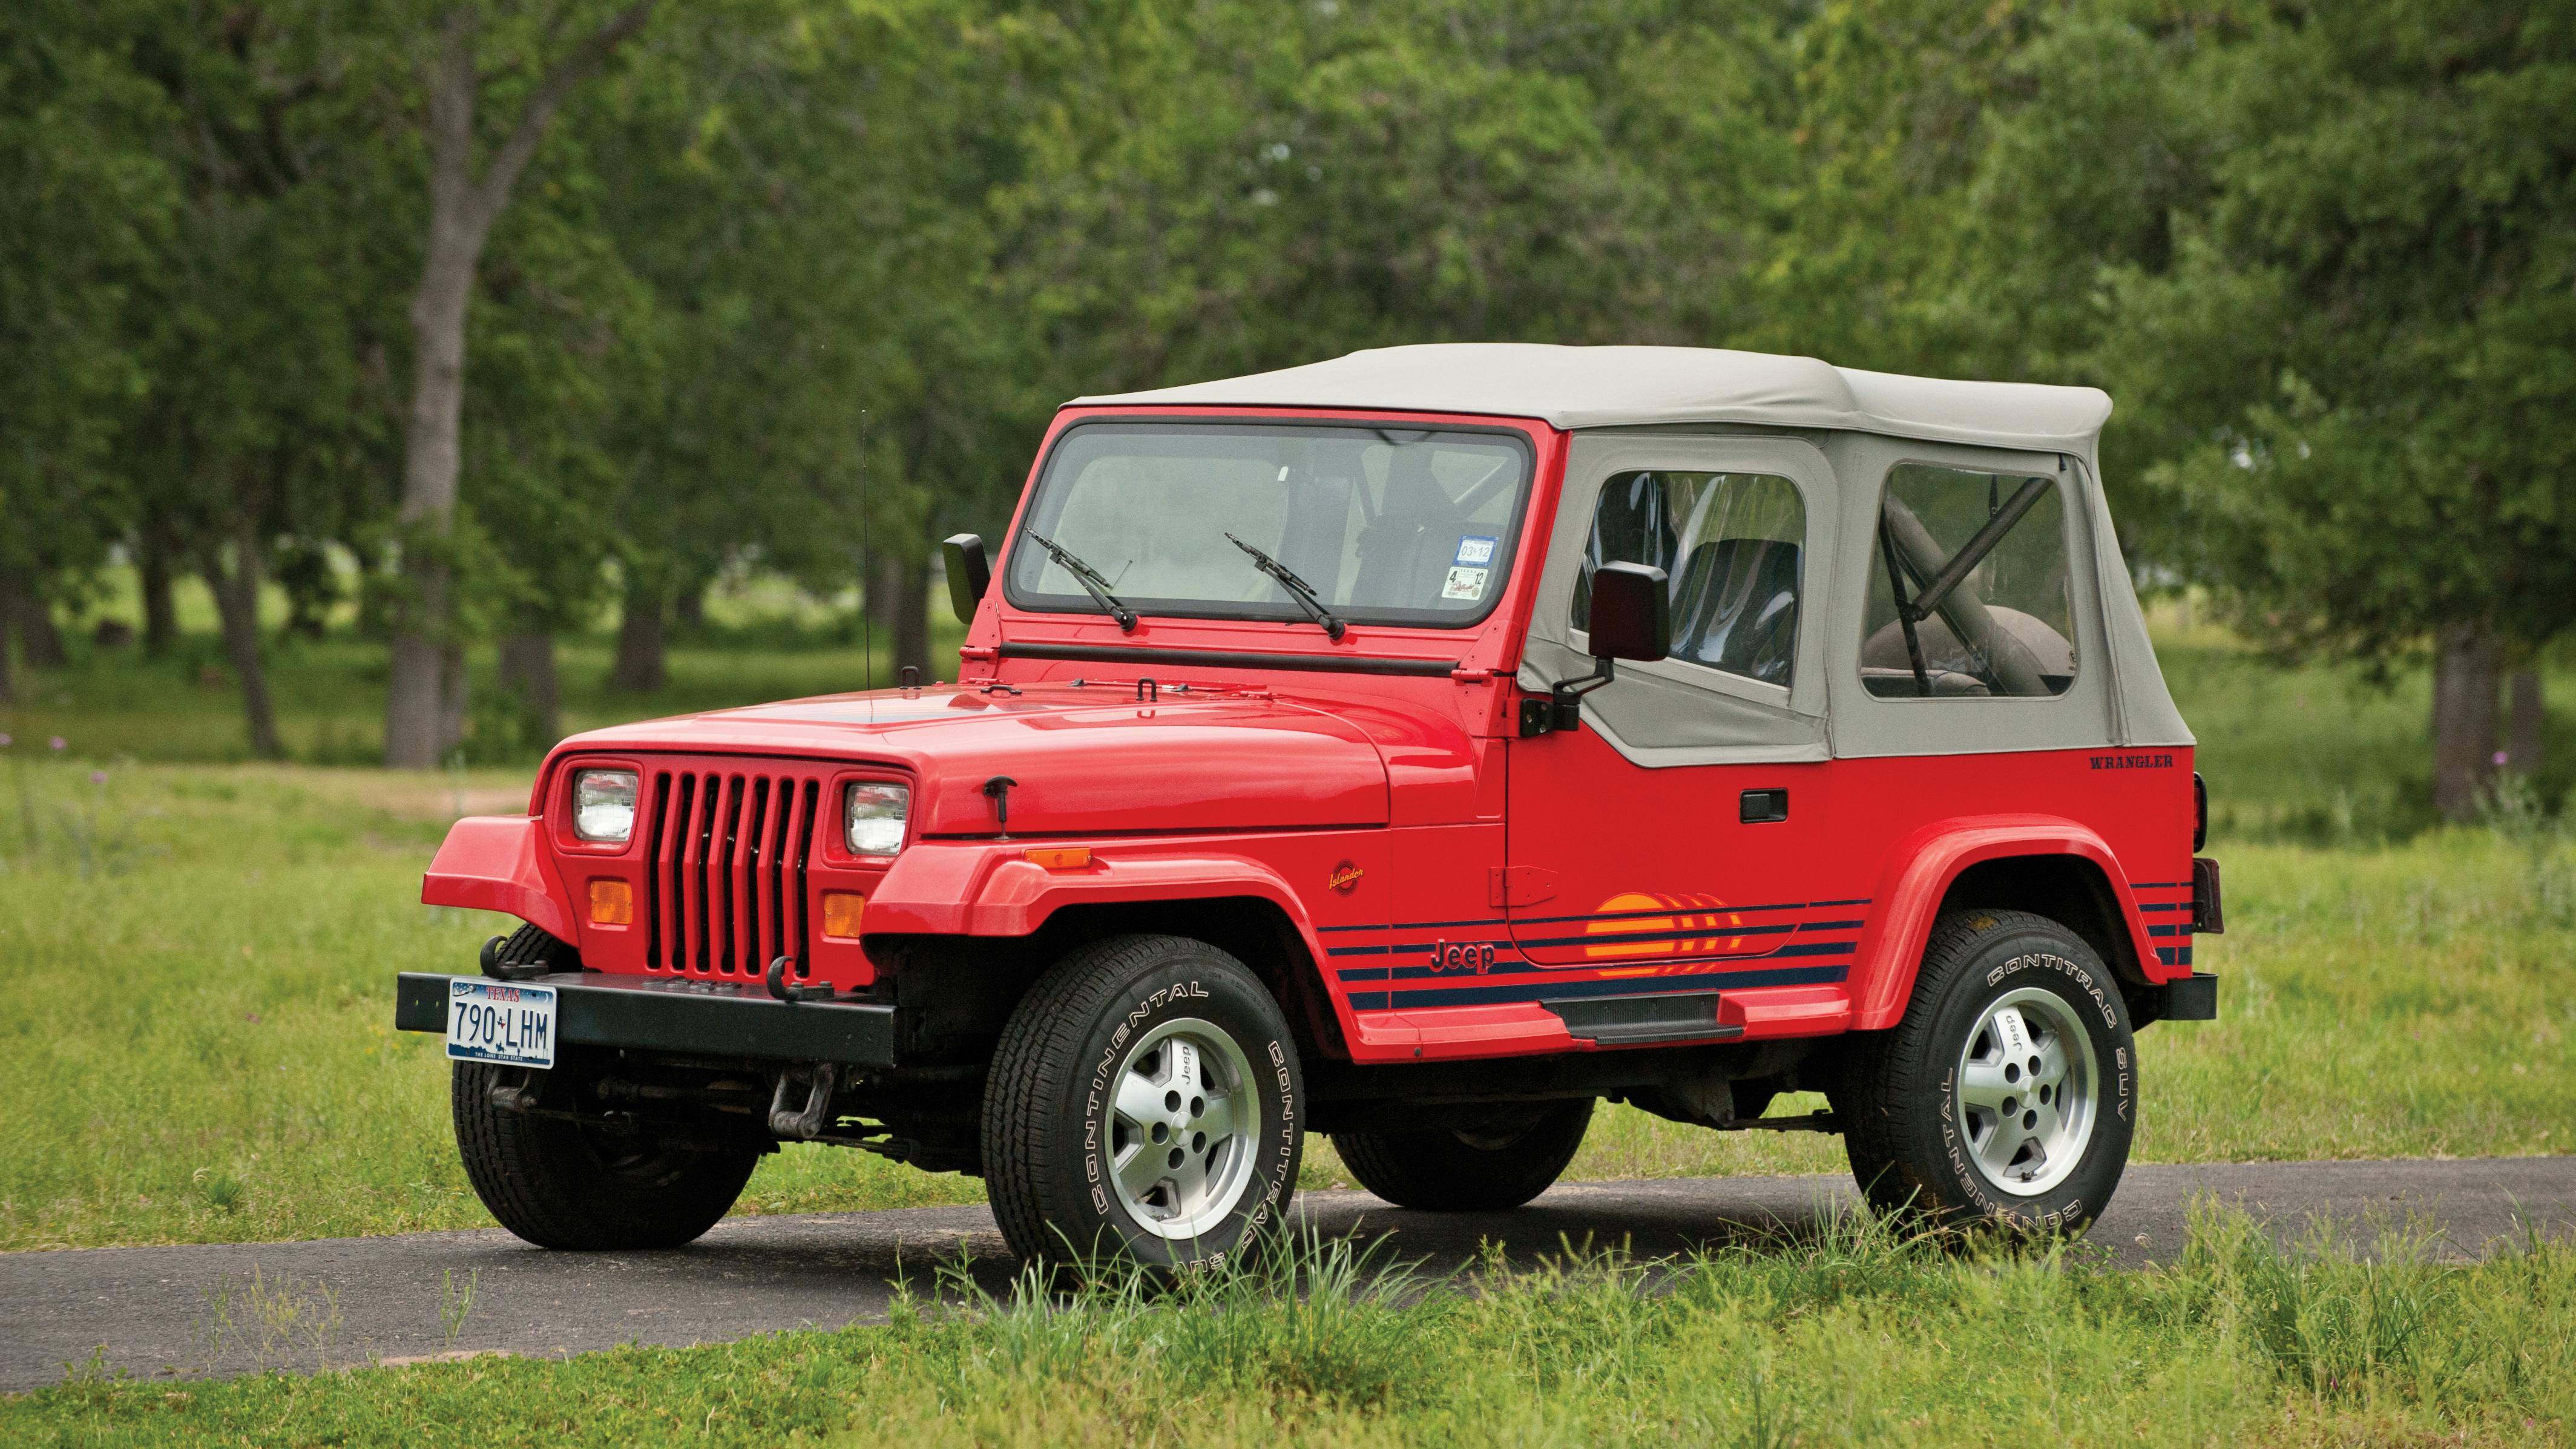 1995 Jeep Wrangler SE | Hagerty Valuation Tools